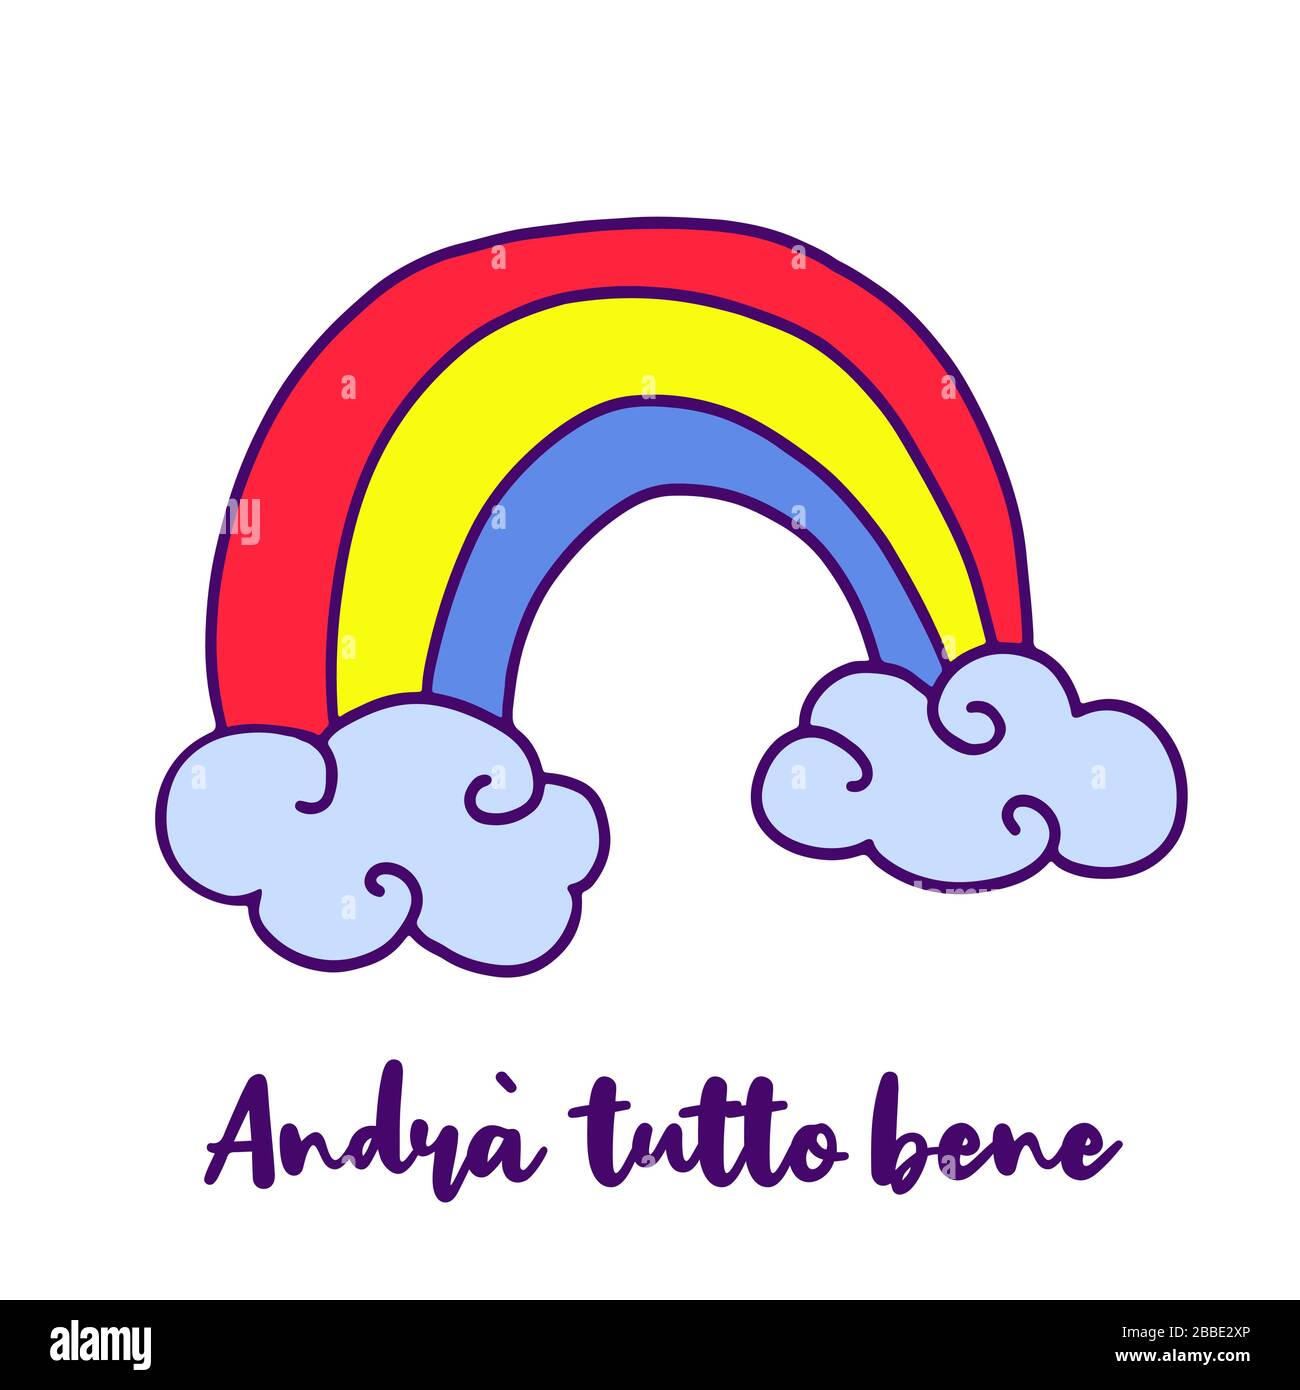 Everything will be ok written in Italian - Andra tutto bene. Simple Rainbow and clouds doodle icon. Hope symbol in coronavirus pandemic. Vector illustration. Stock Vector